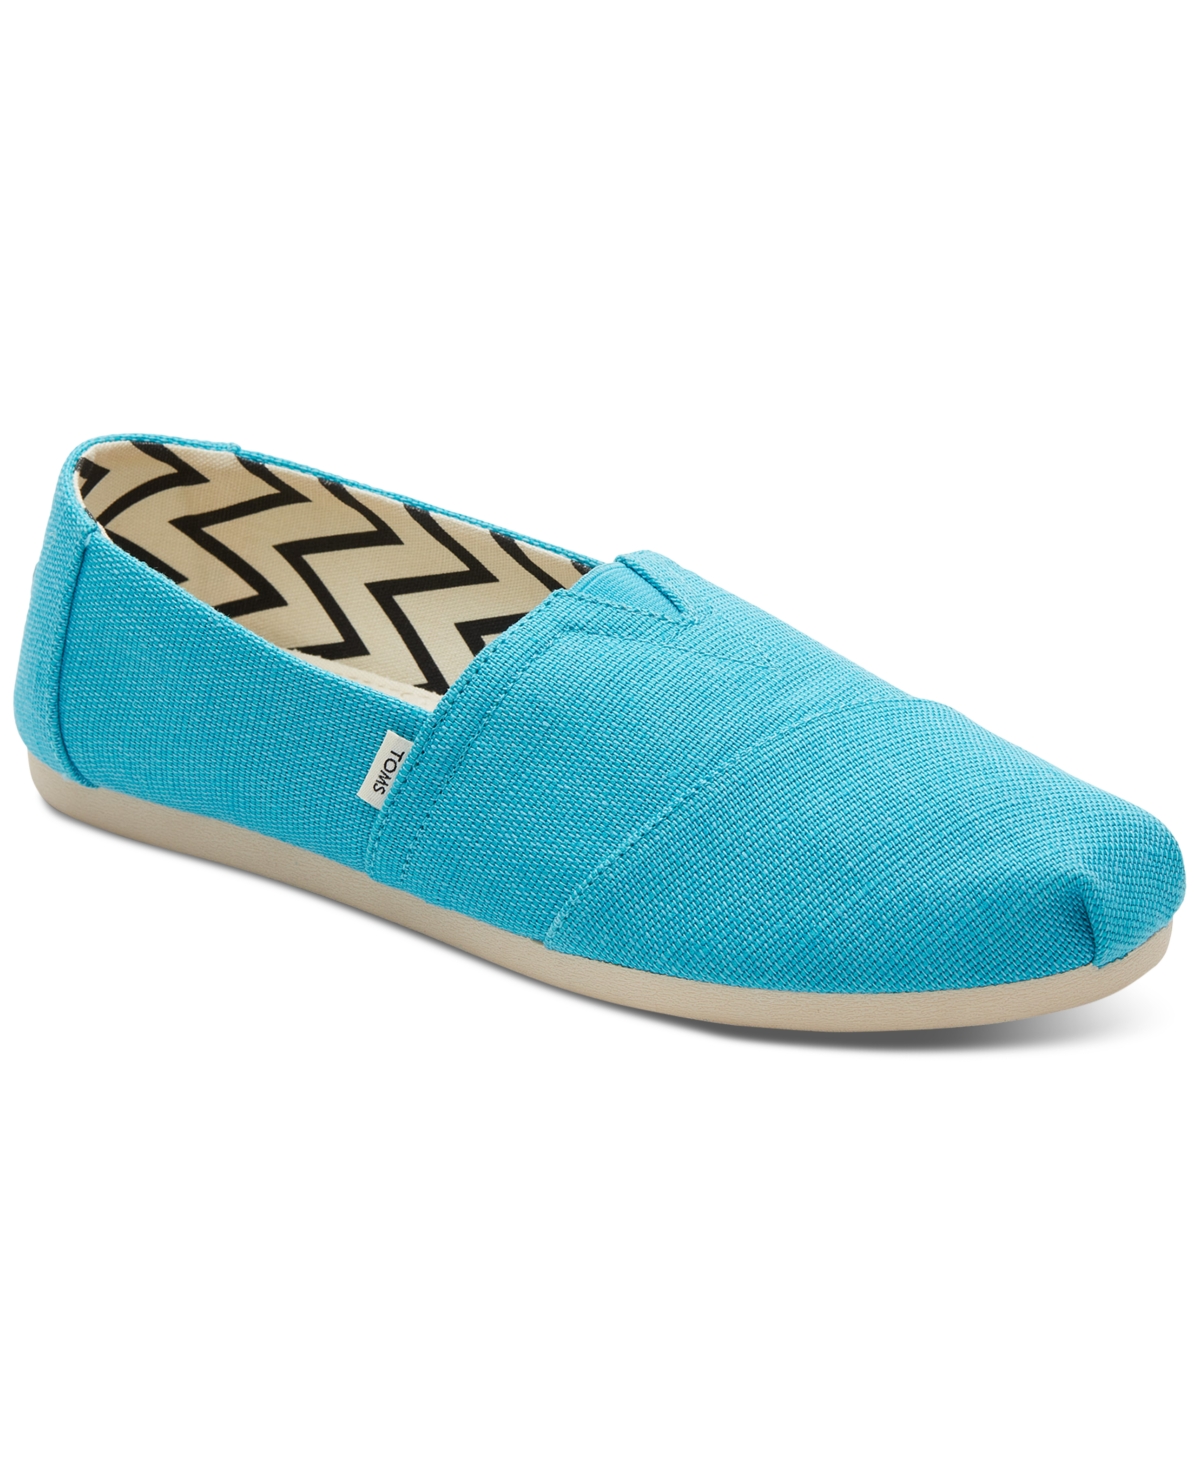 TOMS WOMEN'S ALPARGATA HERITAGE RECYCLED SLIP-ON FLATS WOMEN'S SHOES